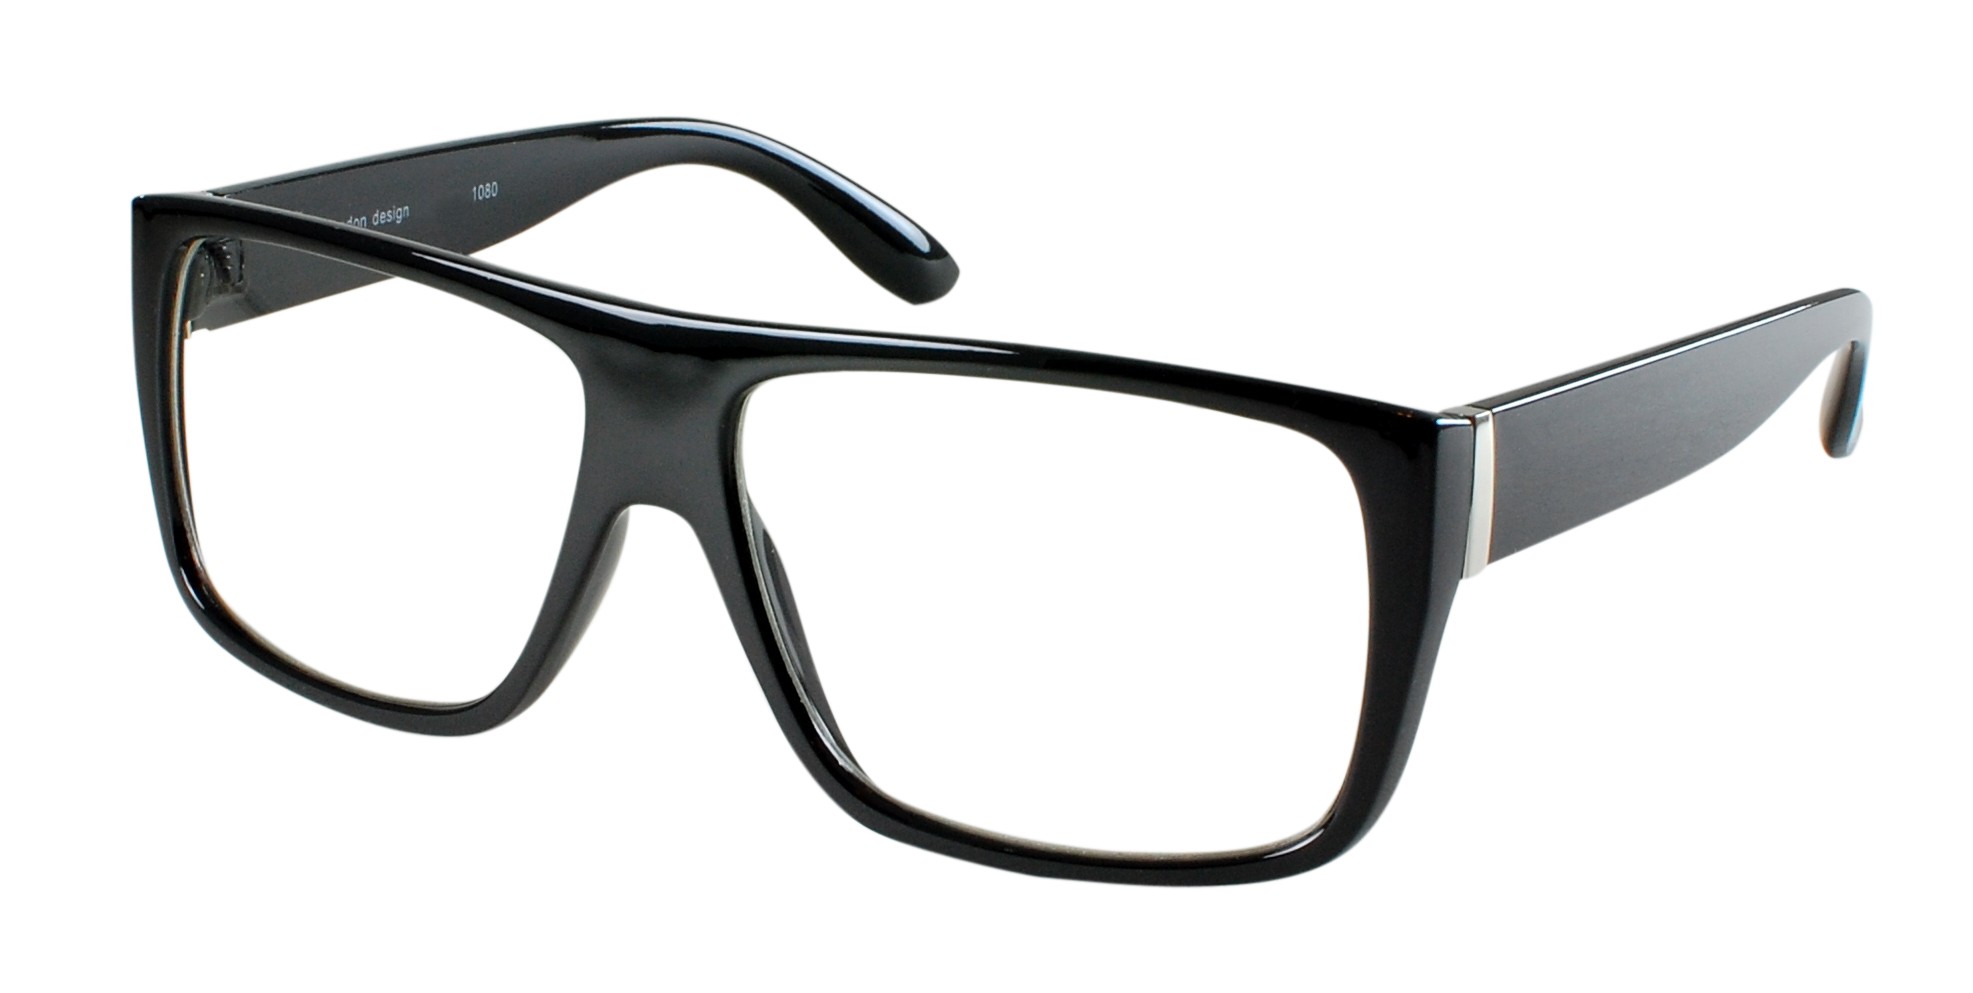 clipart for glasses - photo #5